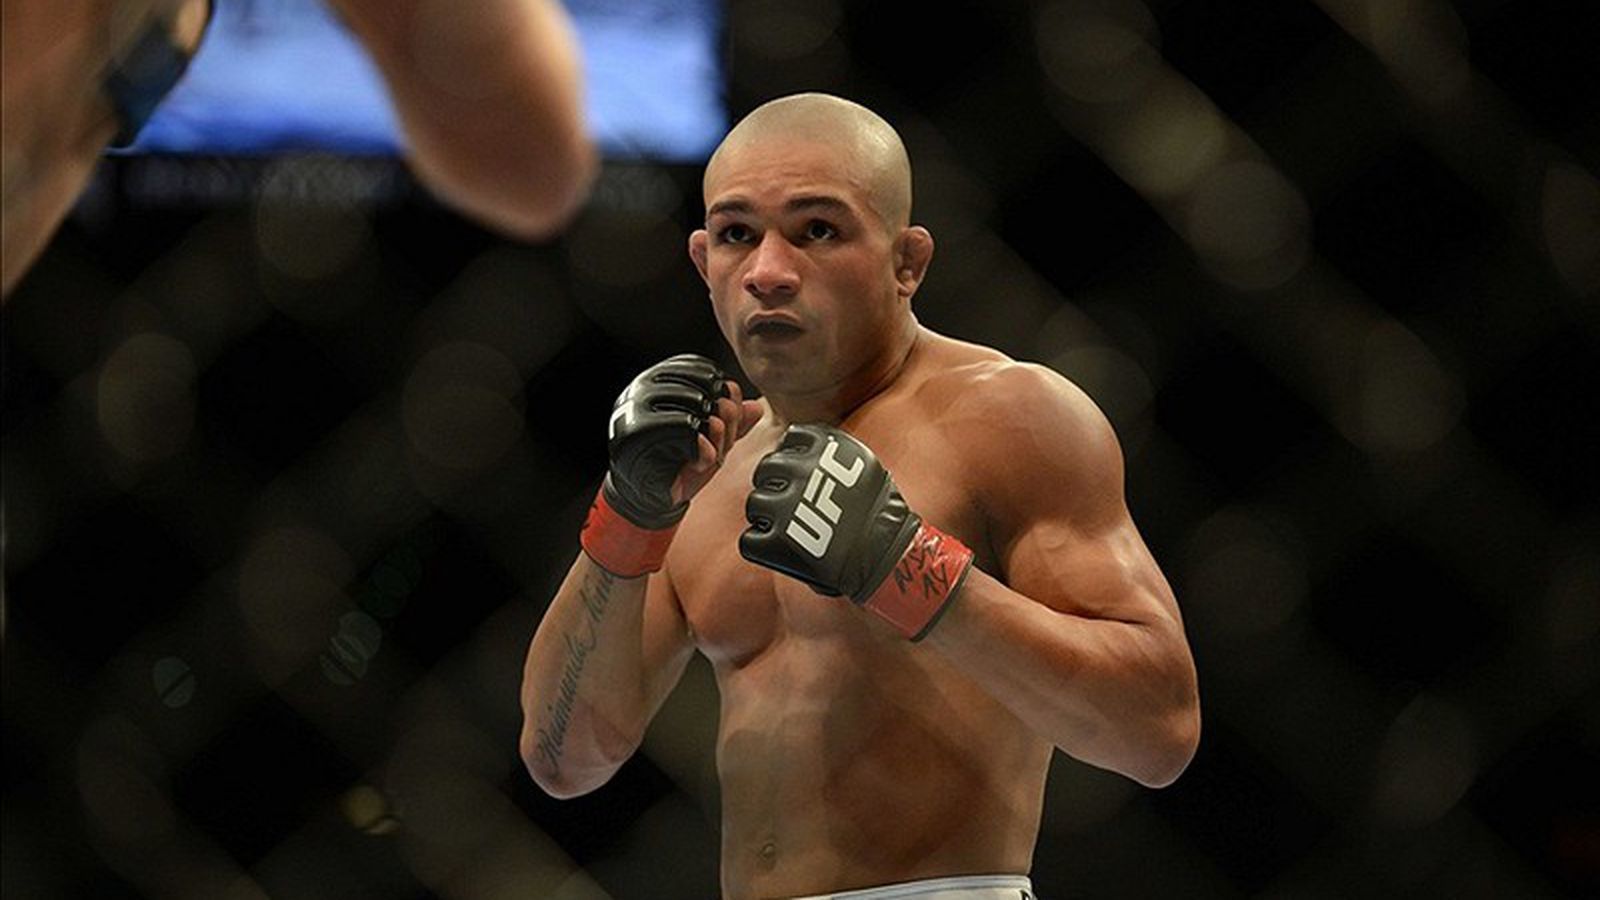 Diego Brandao vs. Mohammad Heibati: Preview, Where to Watch and Betting Odds